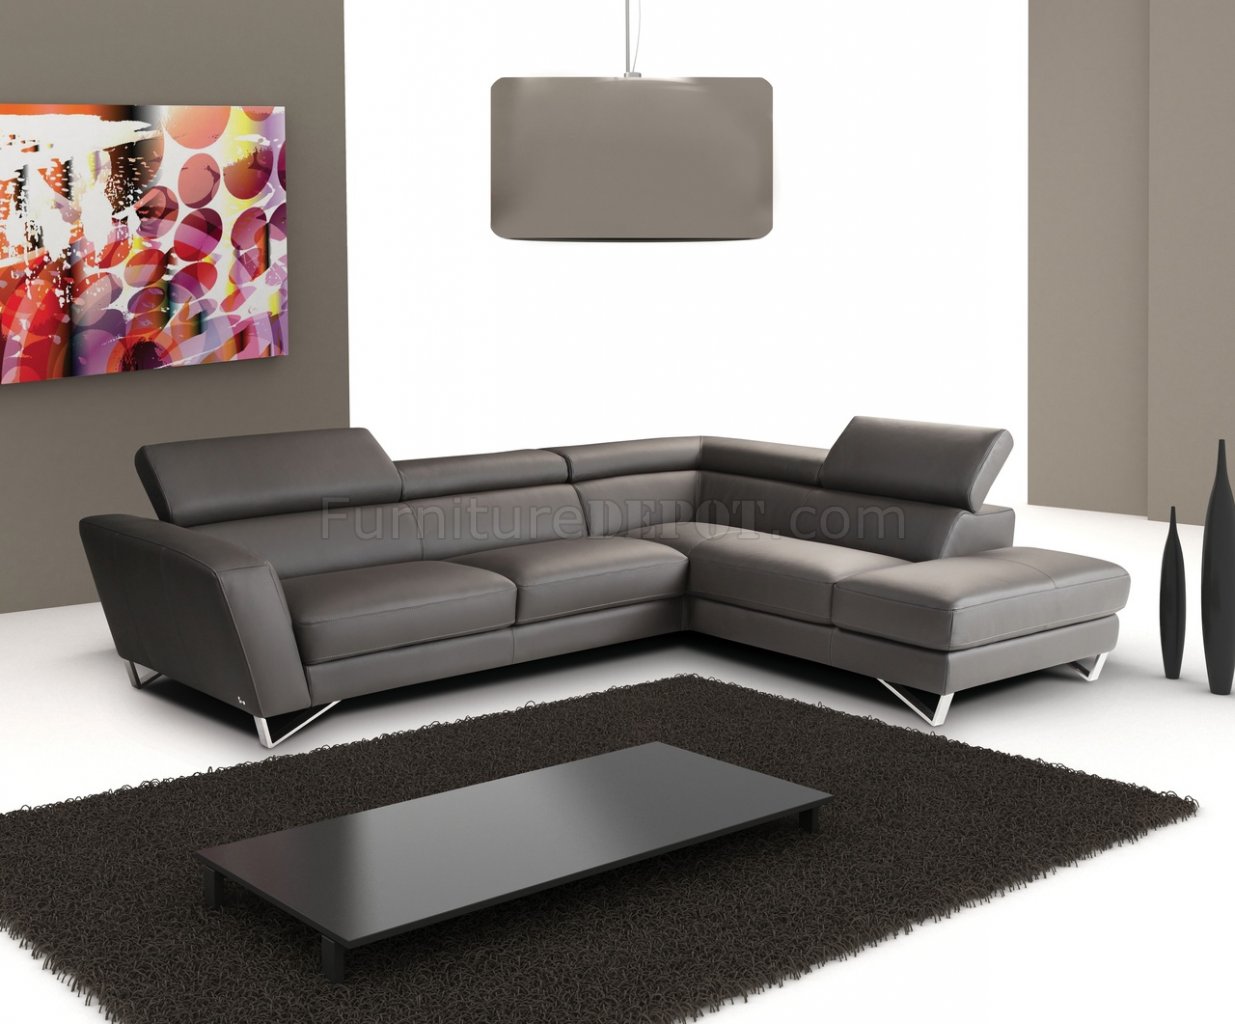 Full Leather Modern Sectional Sofa, Charcoal Grey Leather Sectional